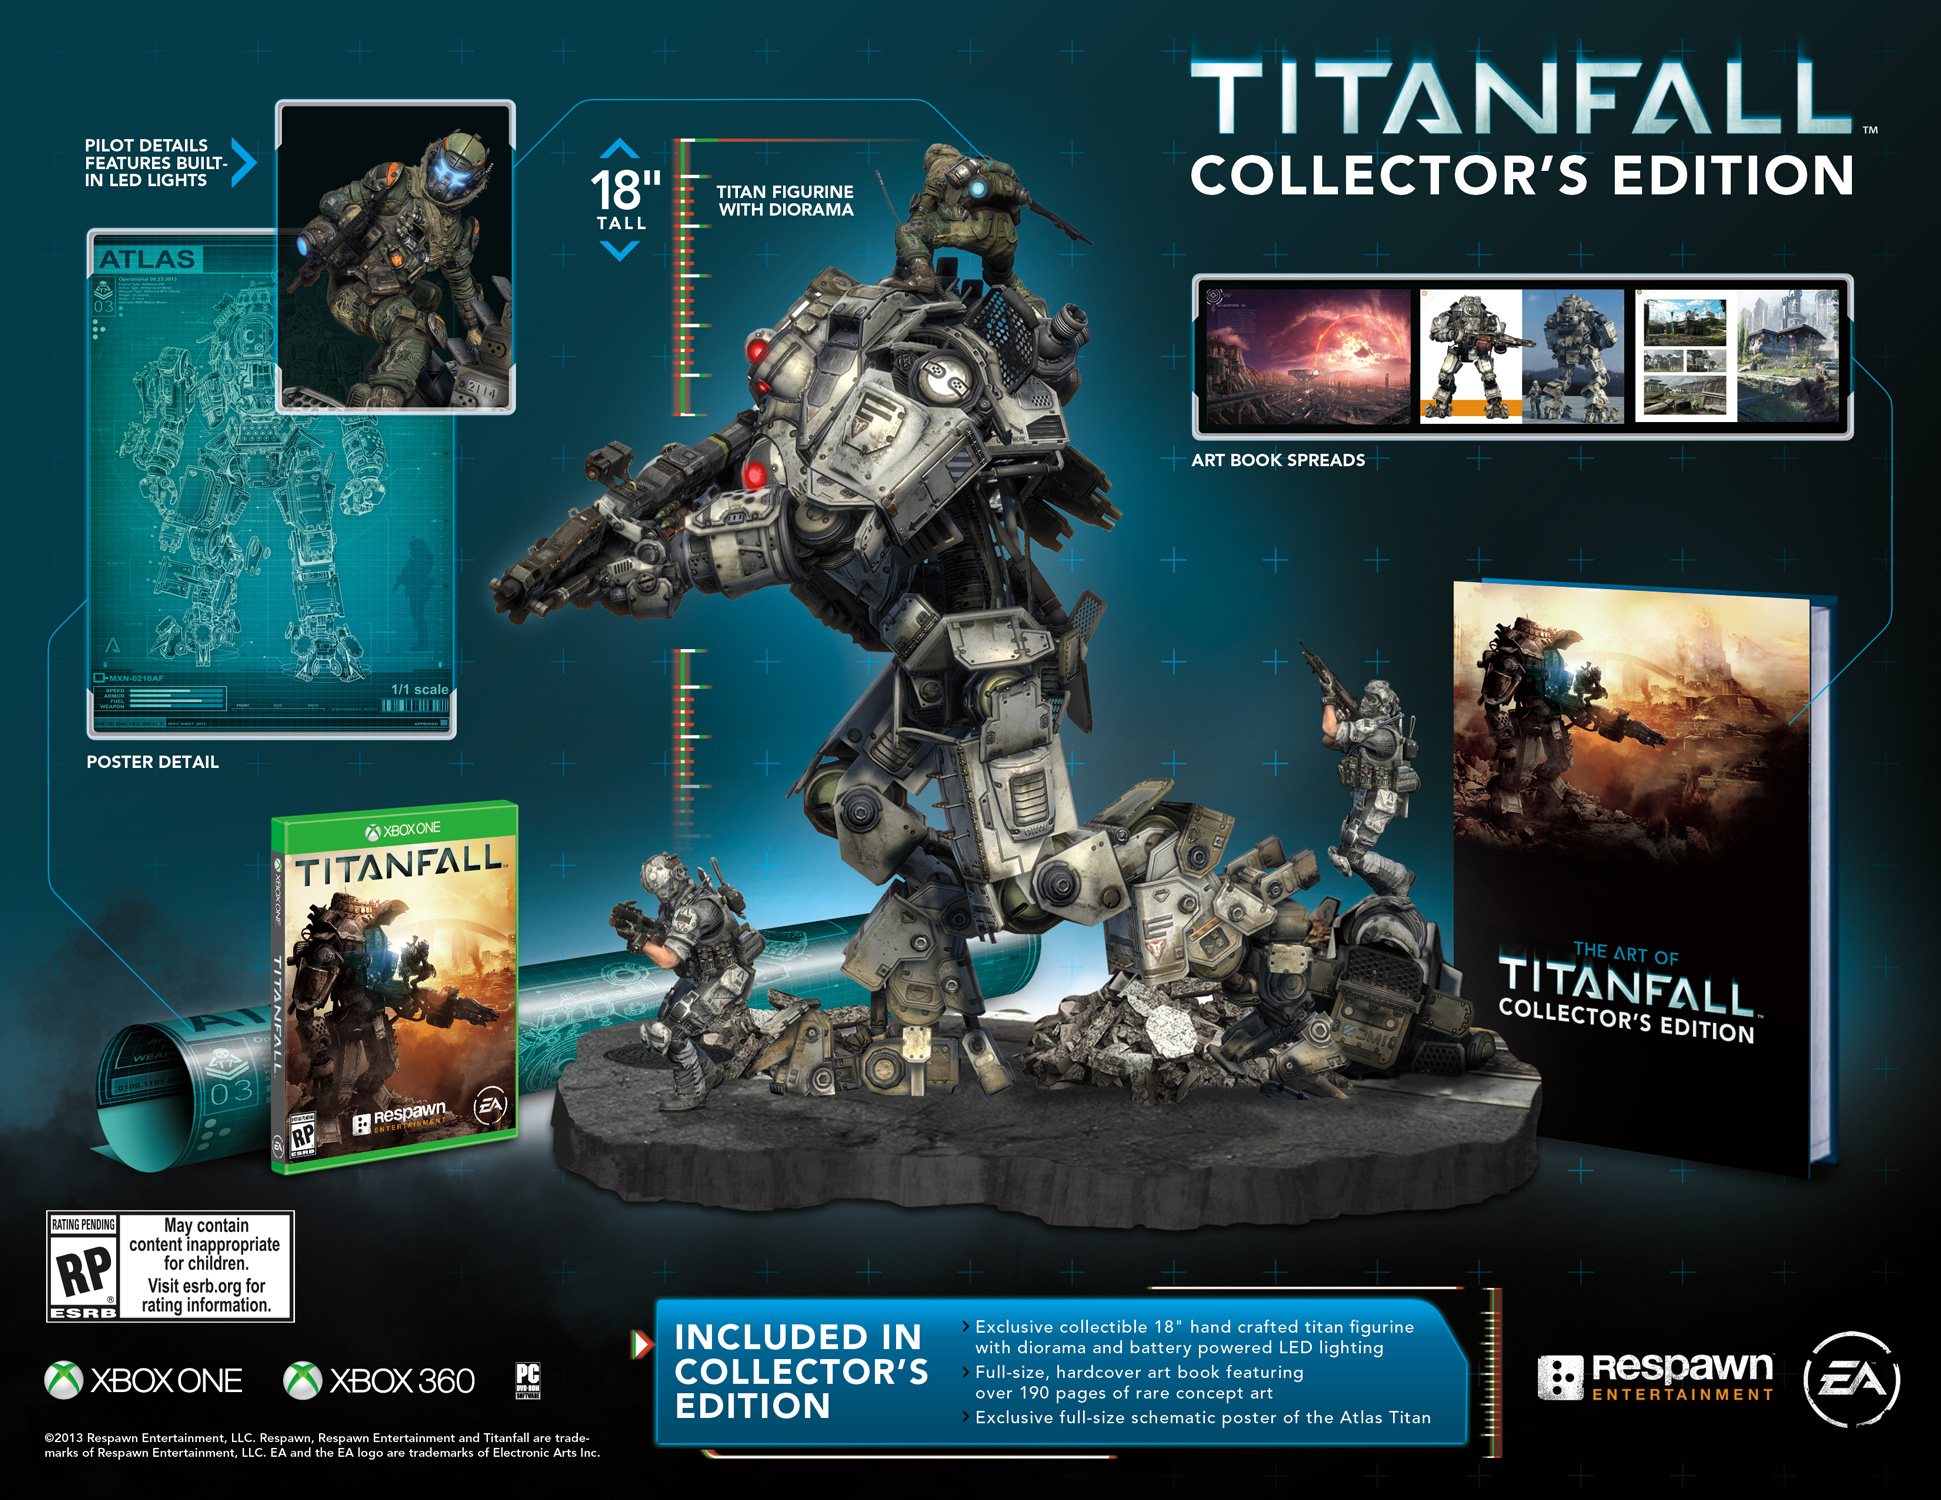 Titanfall Collector's Edition - Collector's Edition - Xbox One - image 4 of 9